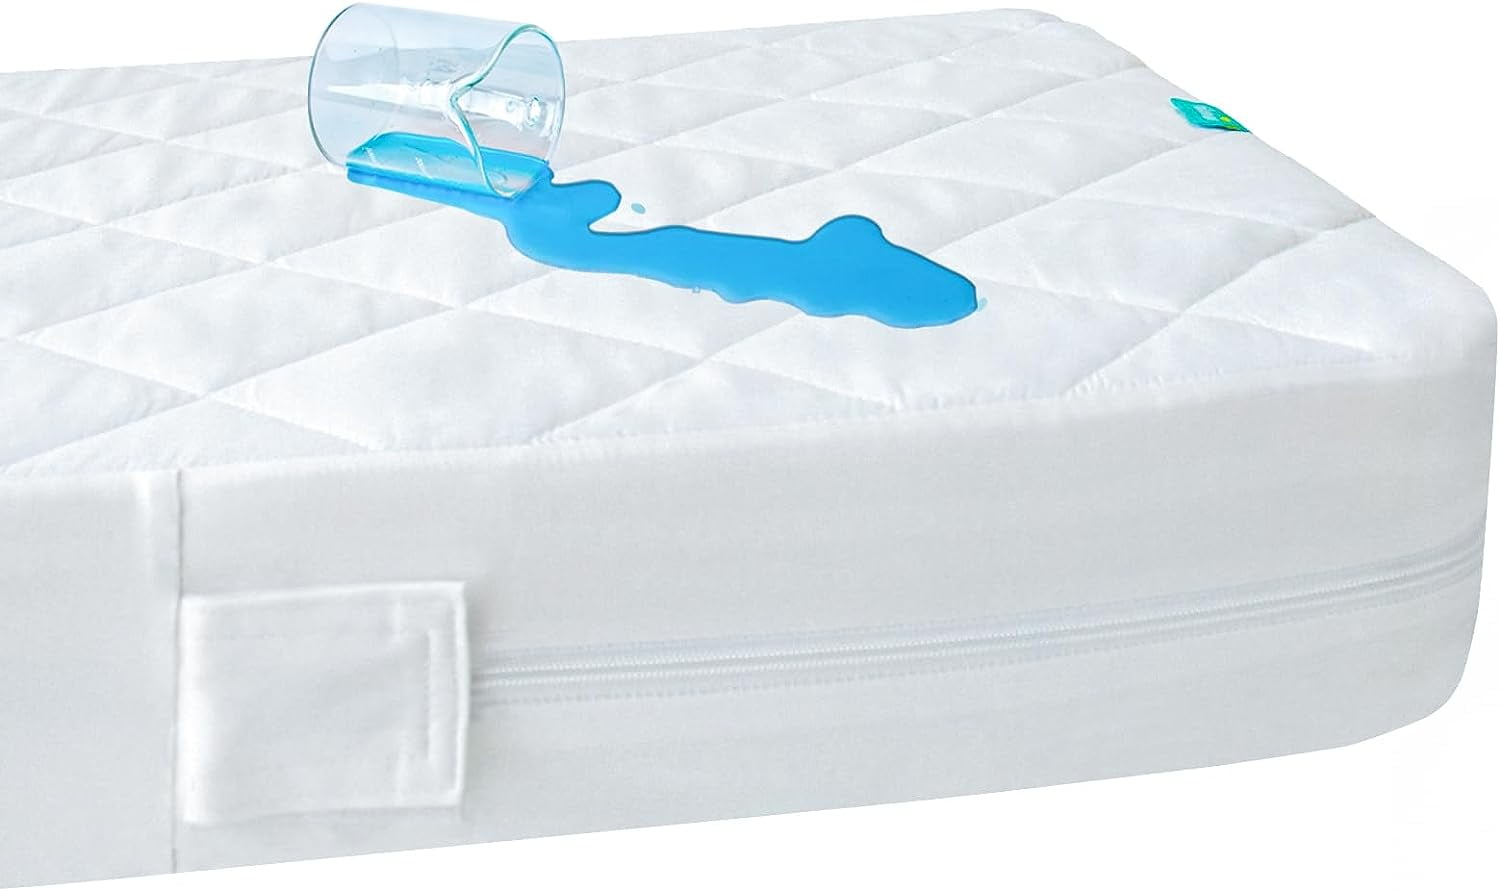 Biloban Toddler Waterproof Crib Mattress Pad Cover, Machine Washable & Dryer Fit Baby Bed Mattress Protector(Standard Size 52” x 28”)